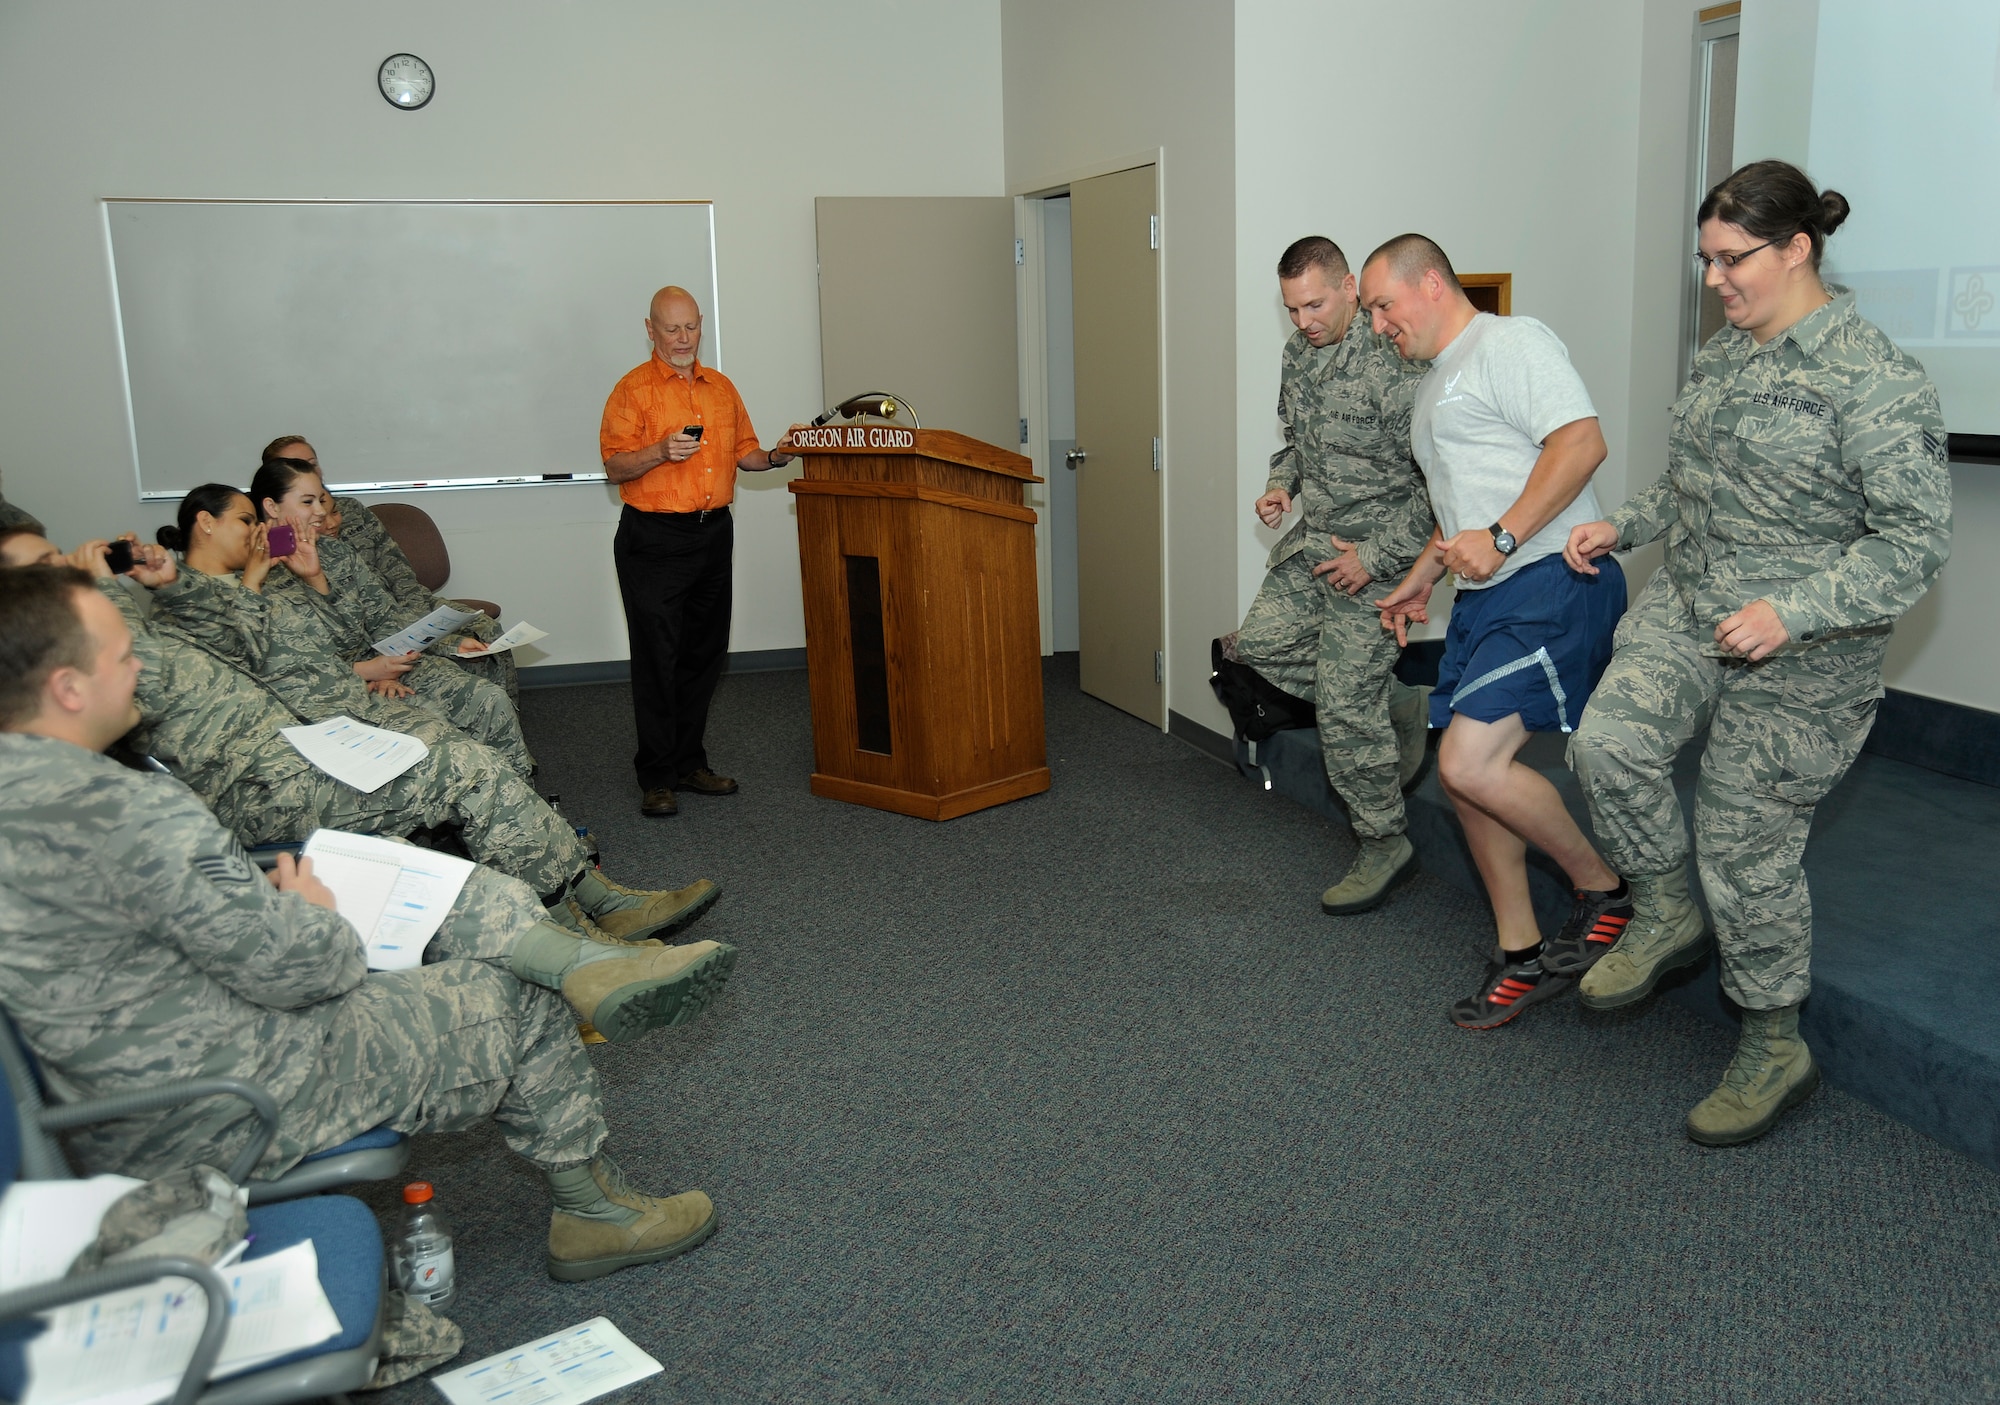 Airmen from the 142nd Fighter Wing Forces Support Squadron, preform a multitasking exercise as part of a discussion presentation by Dr. Allen Cabelly, a professor in Human Resource Management and Leadership at Portland State University. The lecture was part of a training session during the Unit Training Assembly, July 14, 2013, at the Portland Air National Guard Base, Ore. (Air National Guard photo by Tech. Sgt. John Hughel, 142nd Fighter Wing Public Affairs)